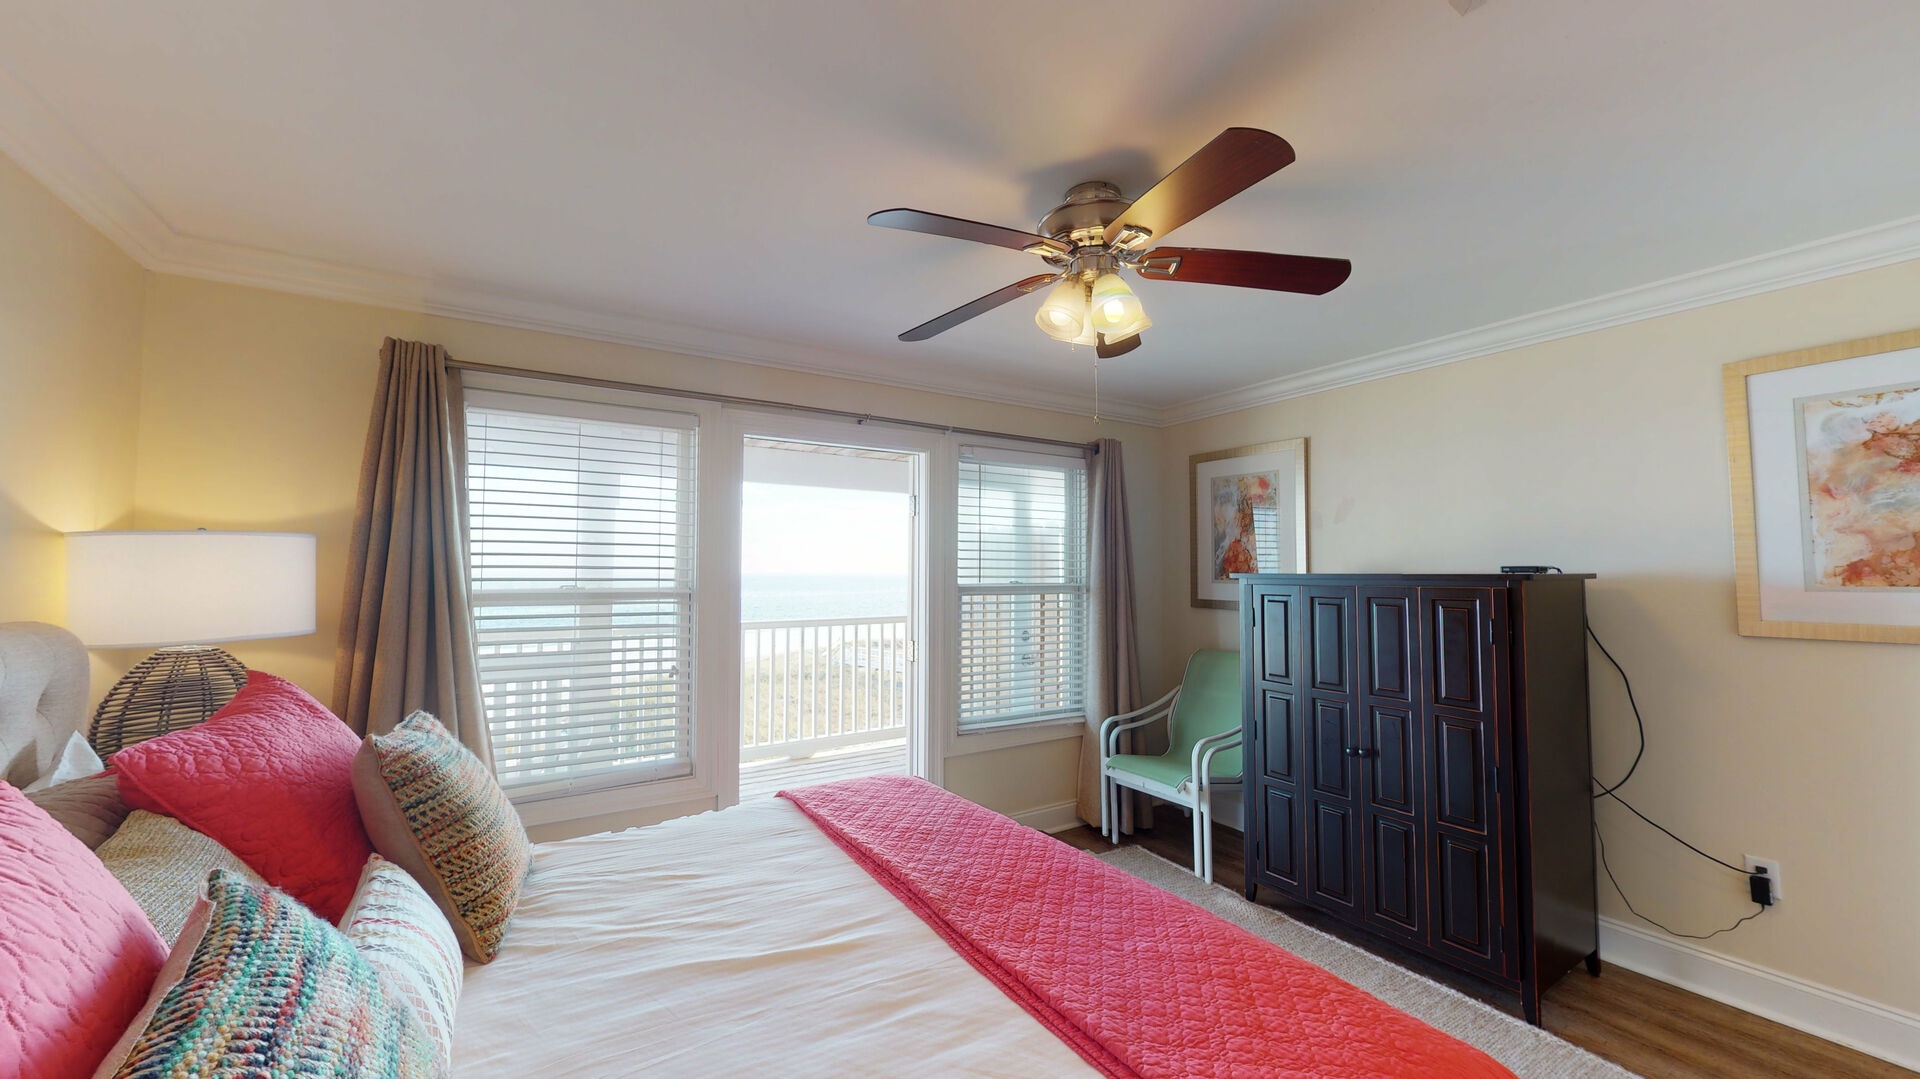 Bedroom 2 has Gulf views, balcony access and a private bath